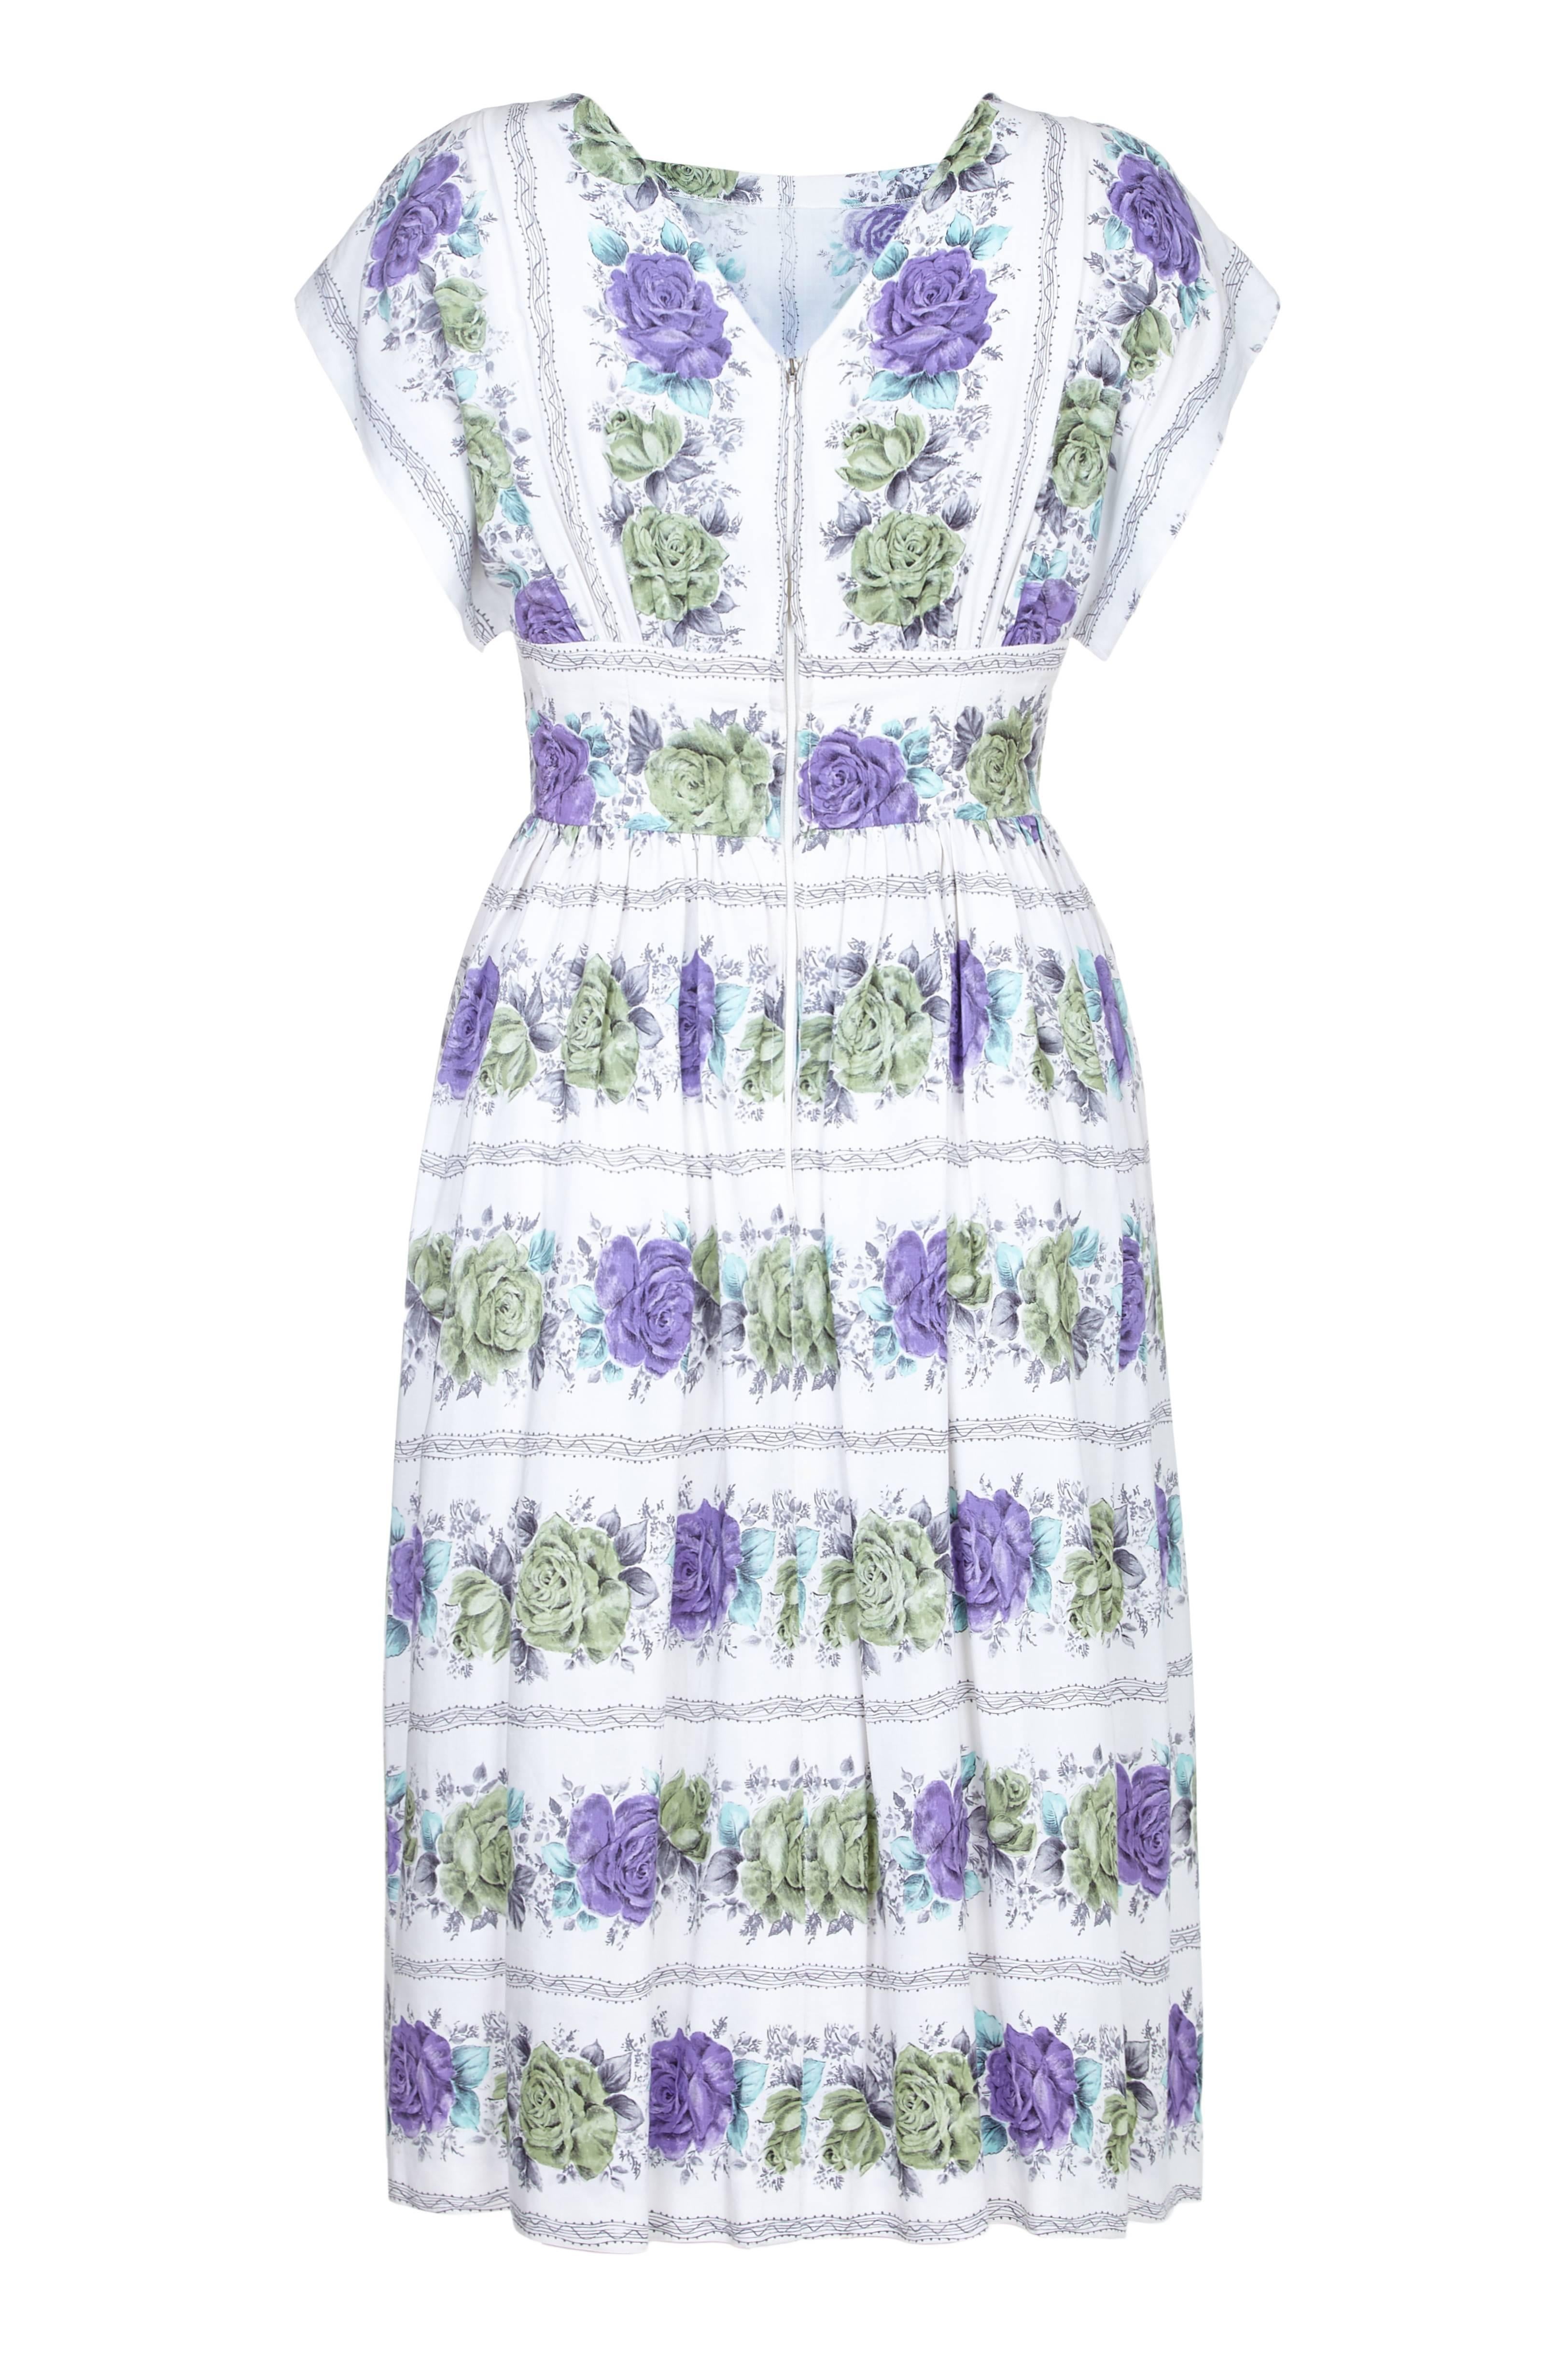 This lovely 1950s white cotton rose print dress is skilfully made and in pristine vintage condition. The fine printed cotton is soft to touch and of notable quality, featuring a pretty linear rose design in pale green, violet and turquoise which